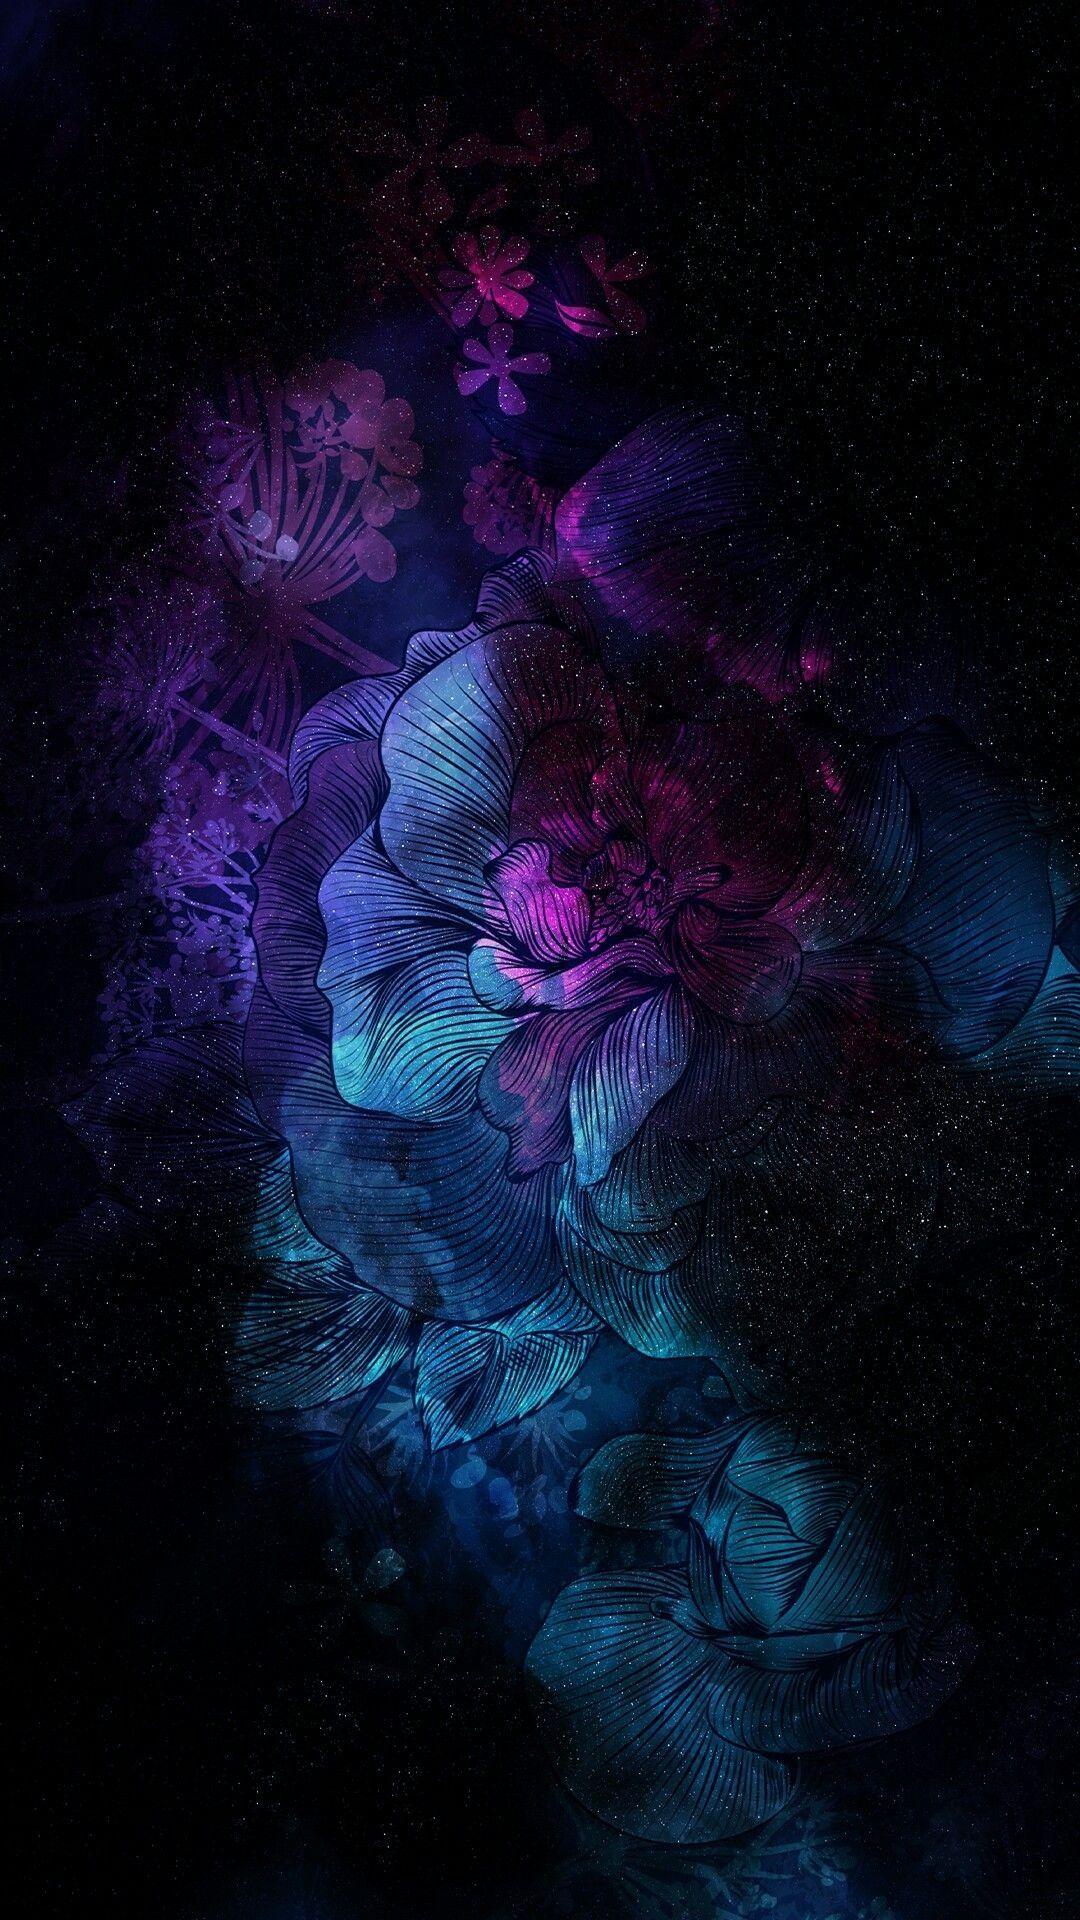 blue flower in dark wallpaper for android and iphones, visit